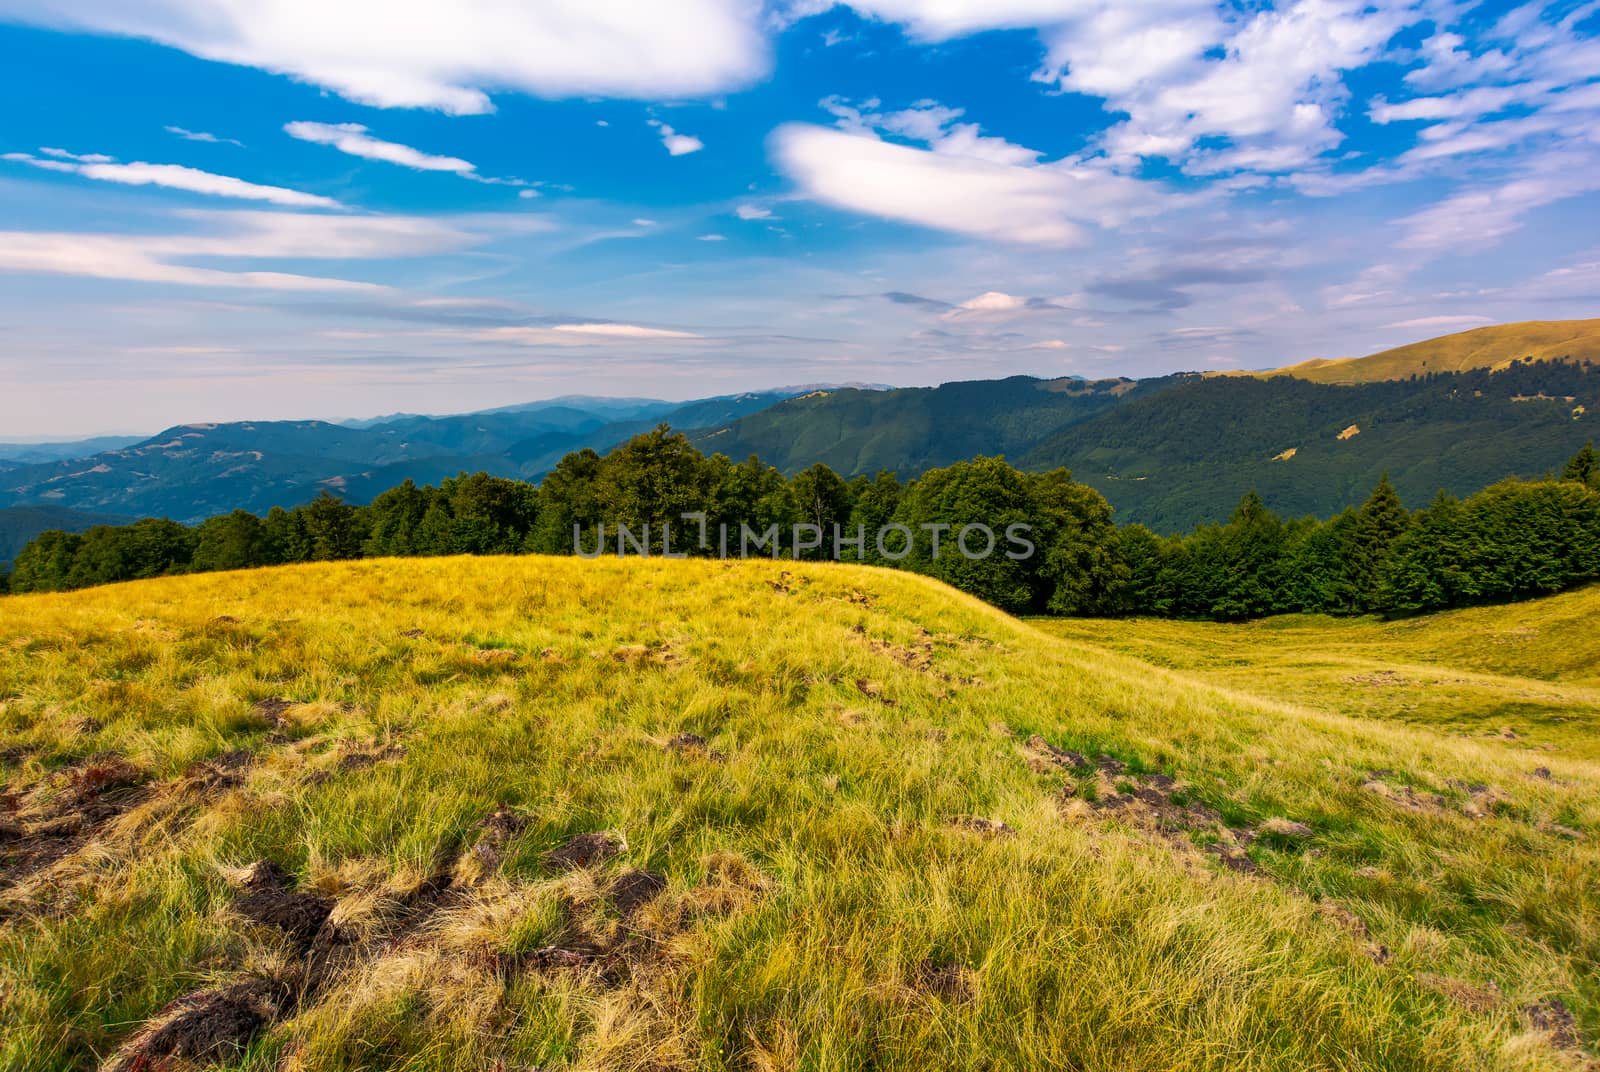 beautiful summer landscape of Carpathians. grassy slopes and forested hillsides. Ukrainian alps with Svydovets mountain ridge in the distance